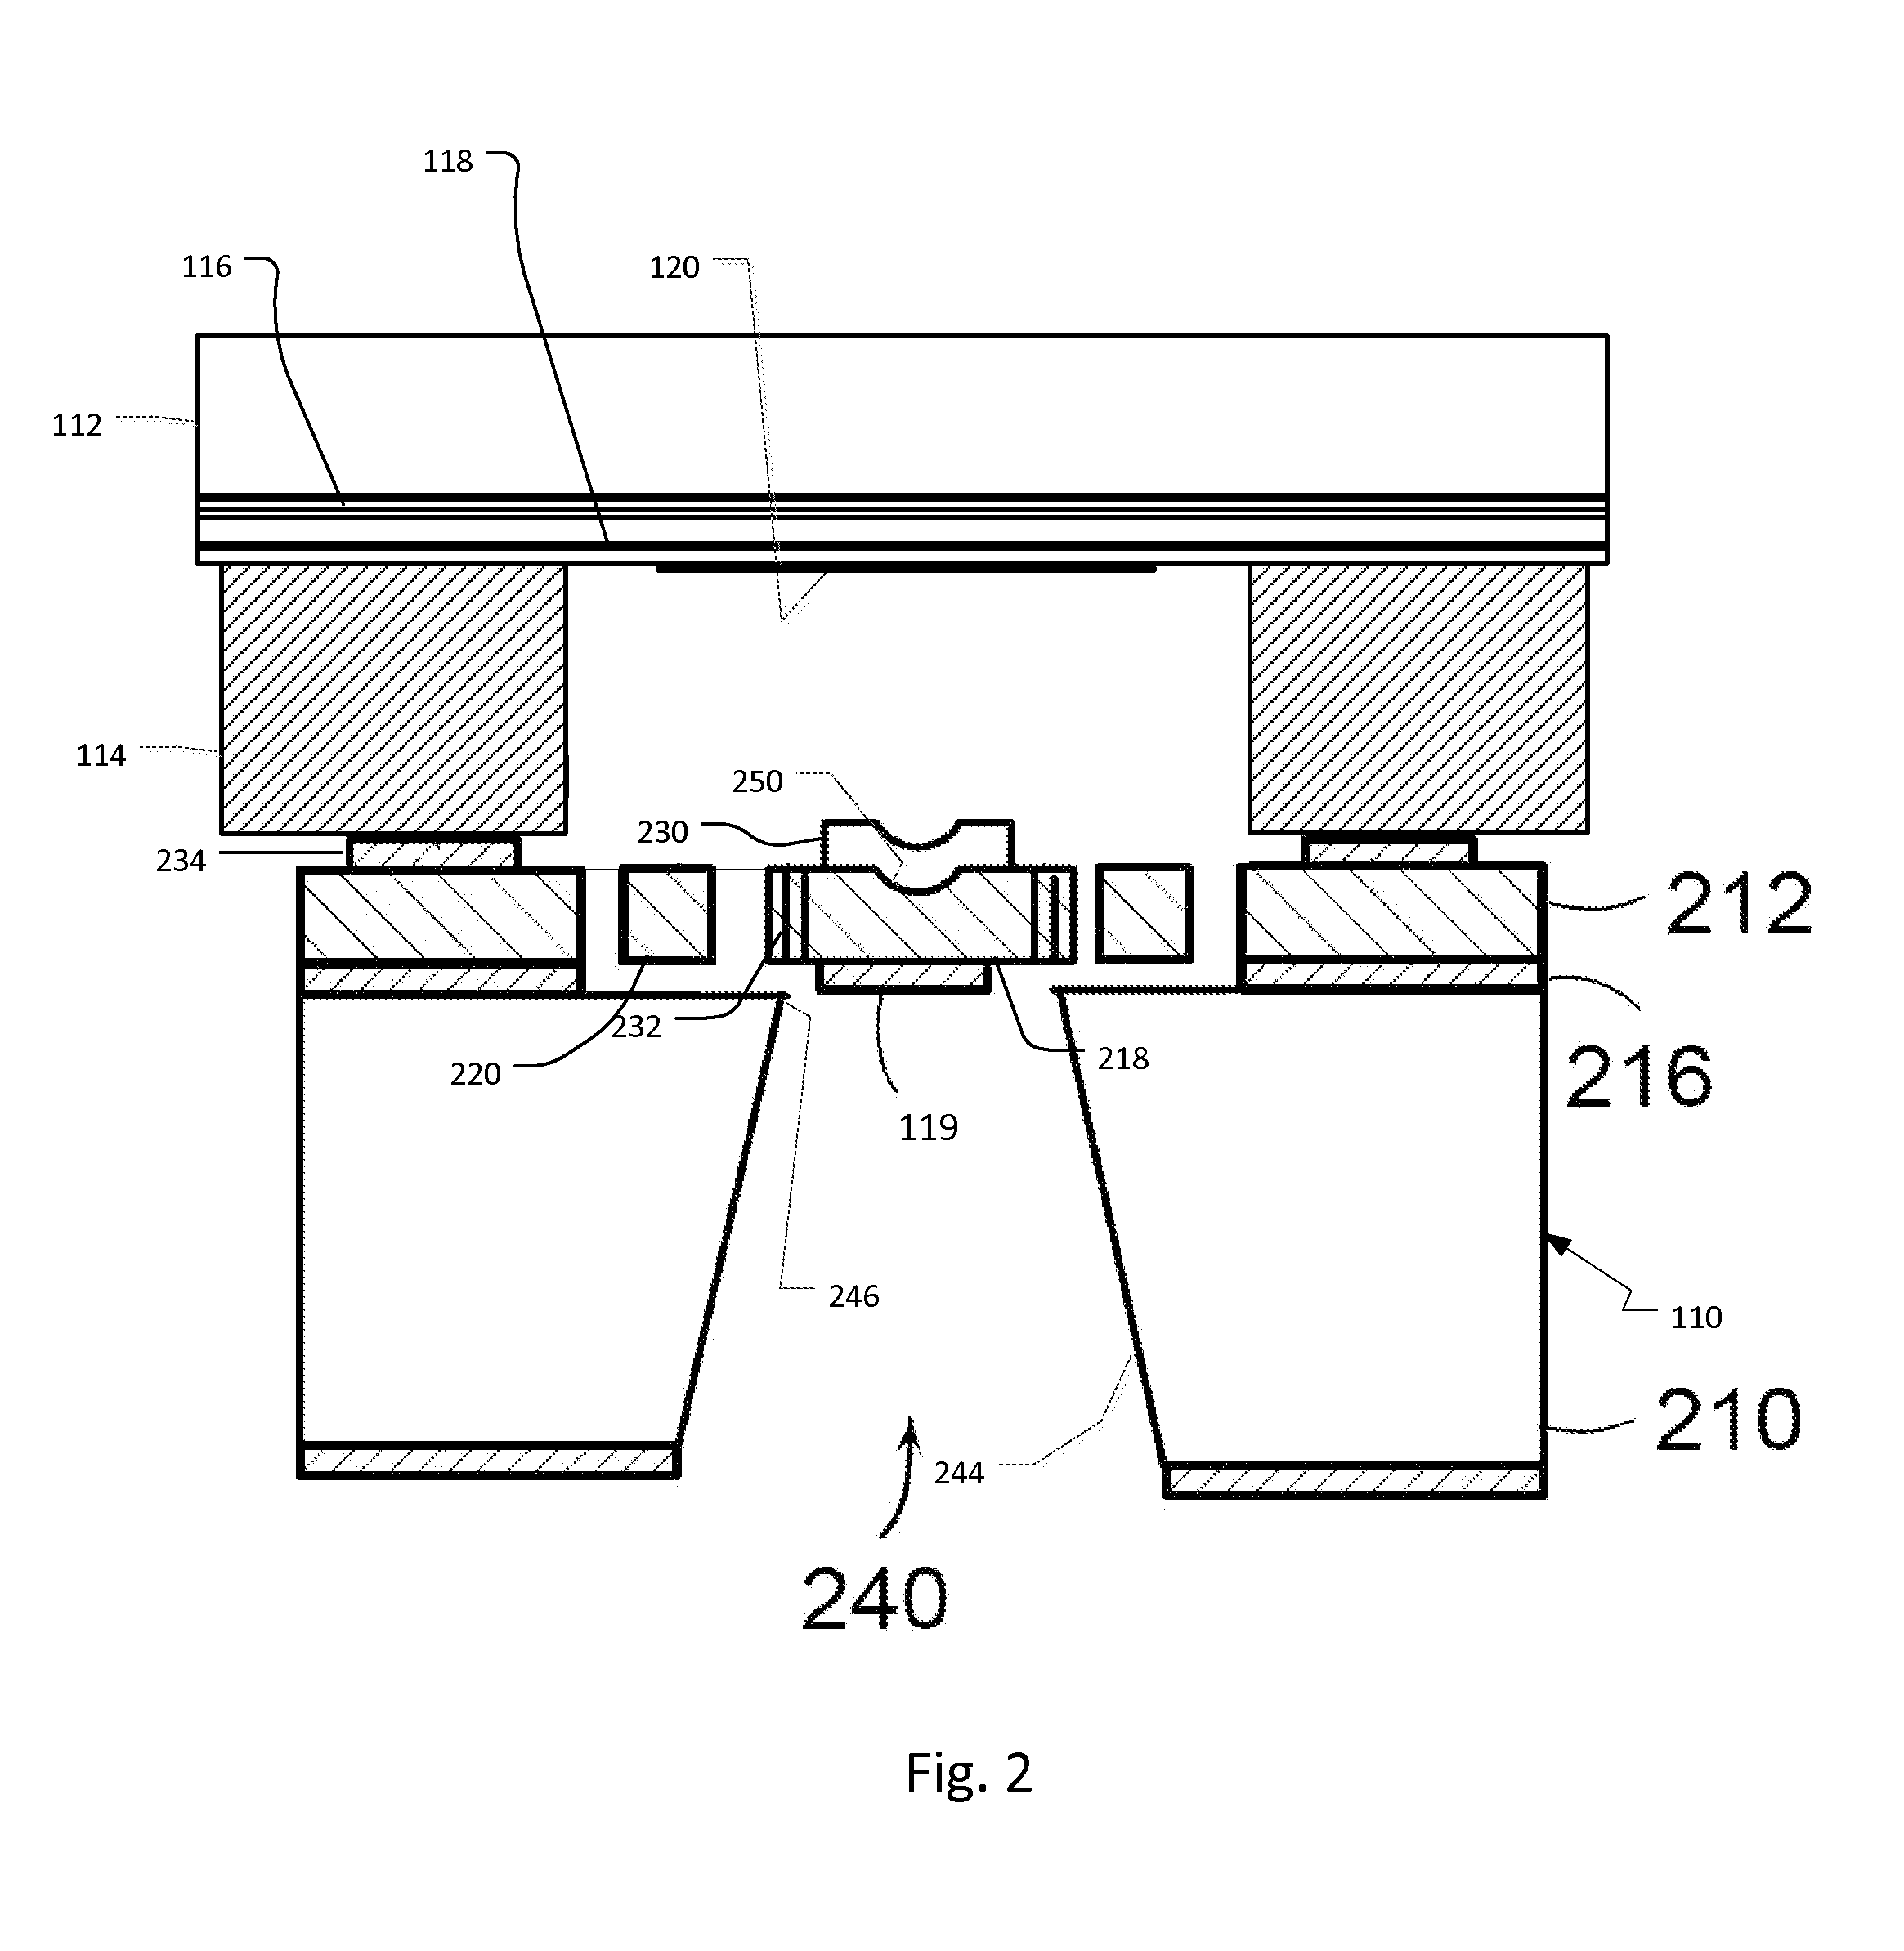 OCT System with Bonded MEMS Tunable Mirror VCSEL Swept Source